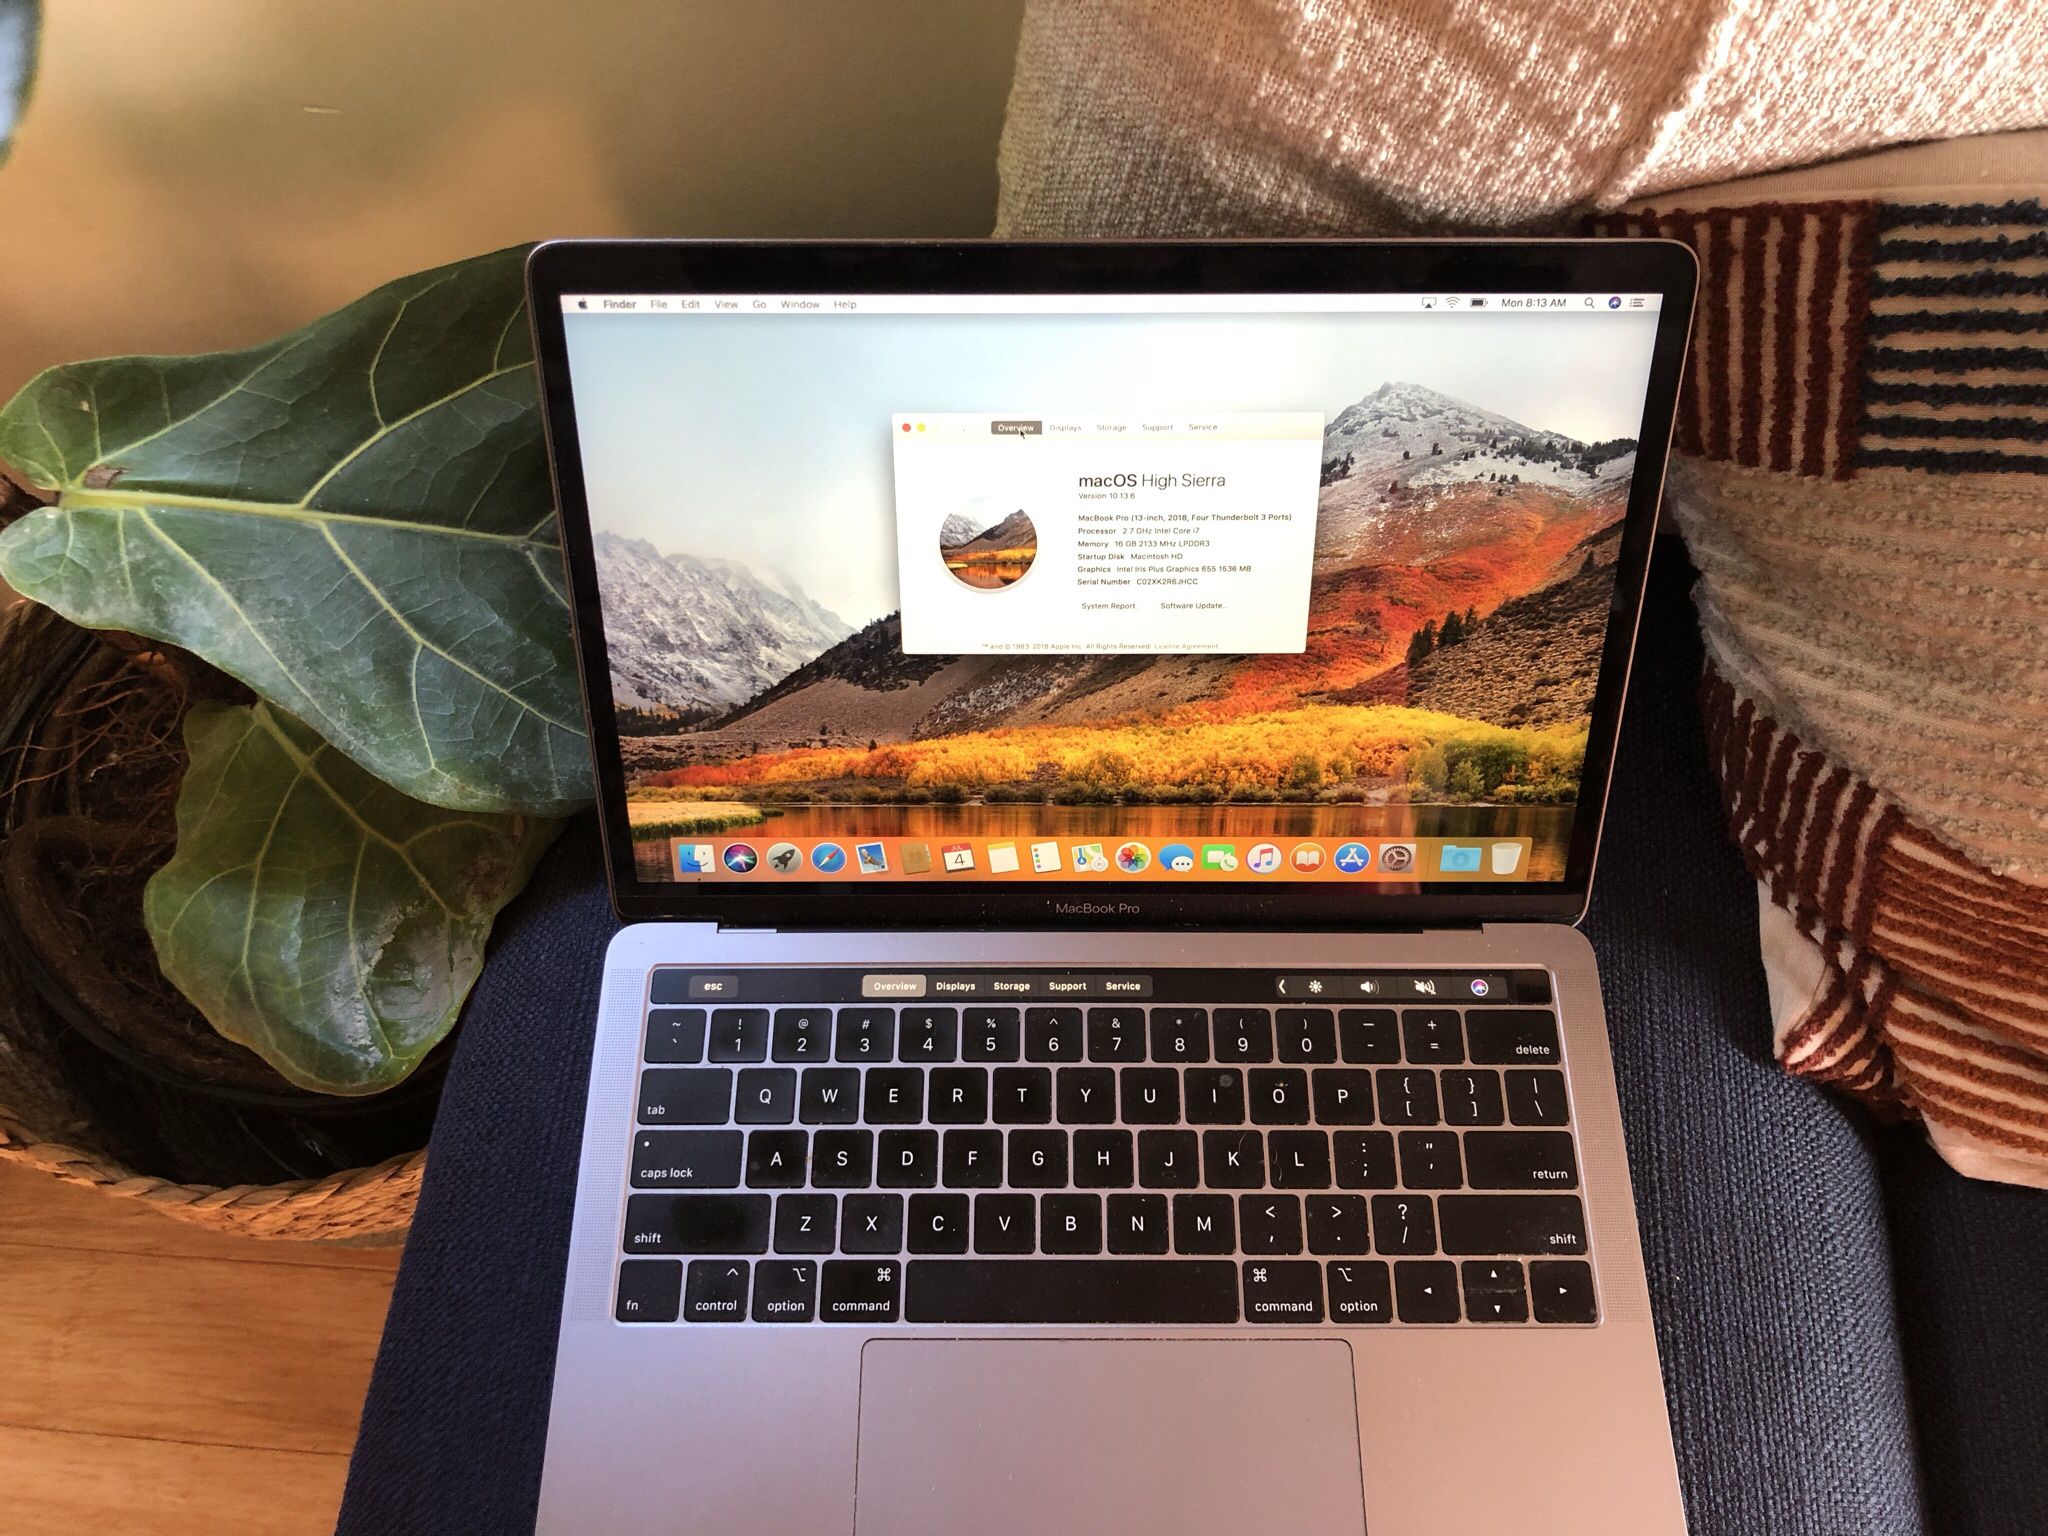 MacBook Pro 13” for Sale in Portland, OR - OfferUp